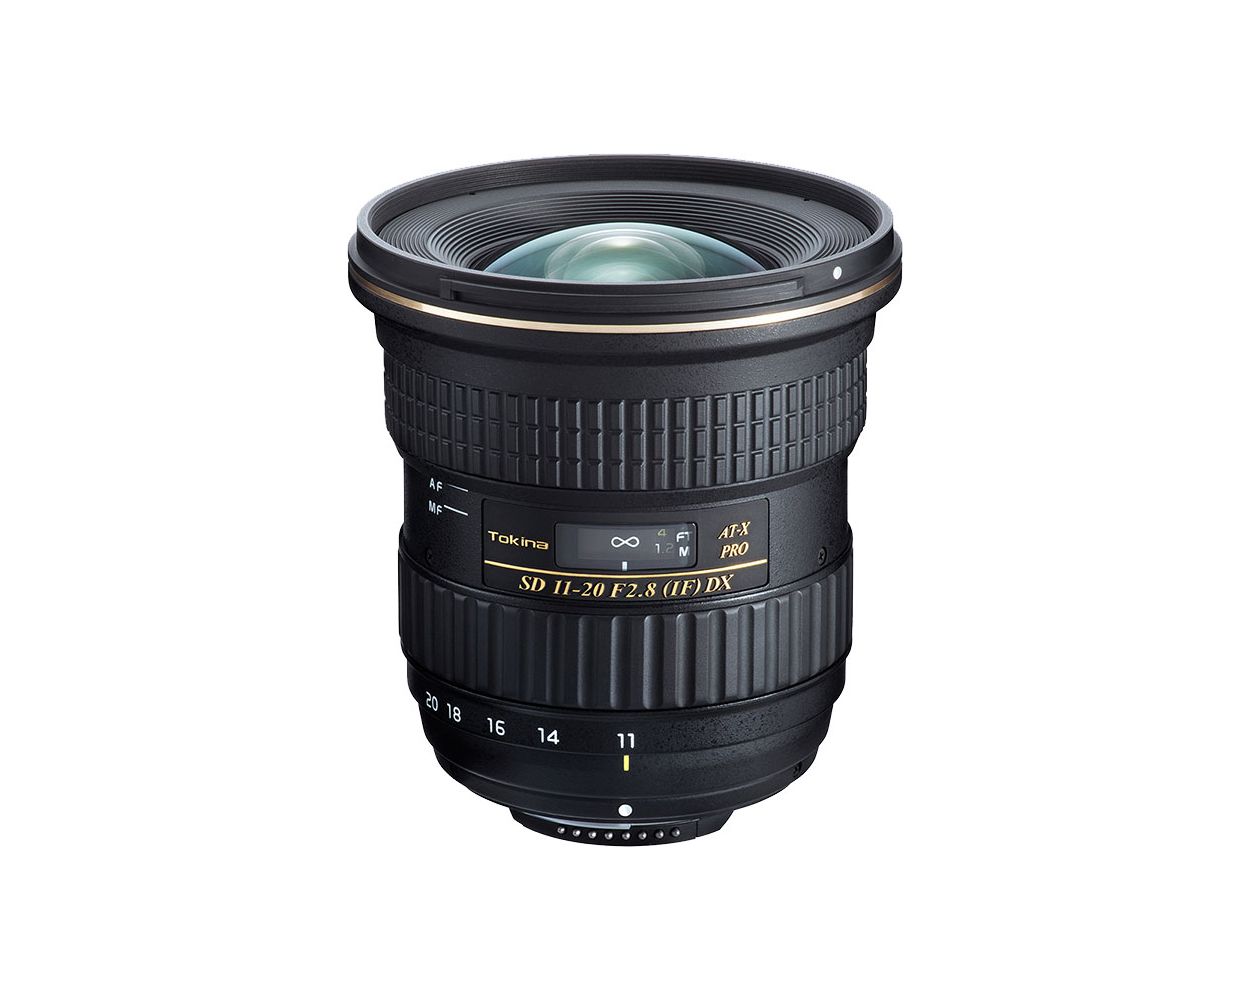 Tokina AT-X 11-20mm f/2.8 PRO DX Aspherical Wide Angle Lens